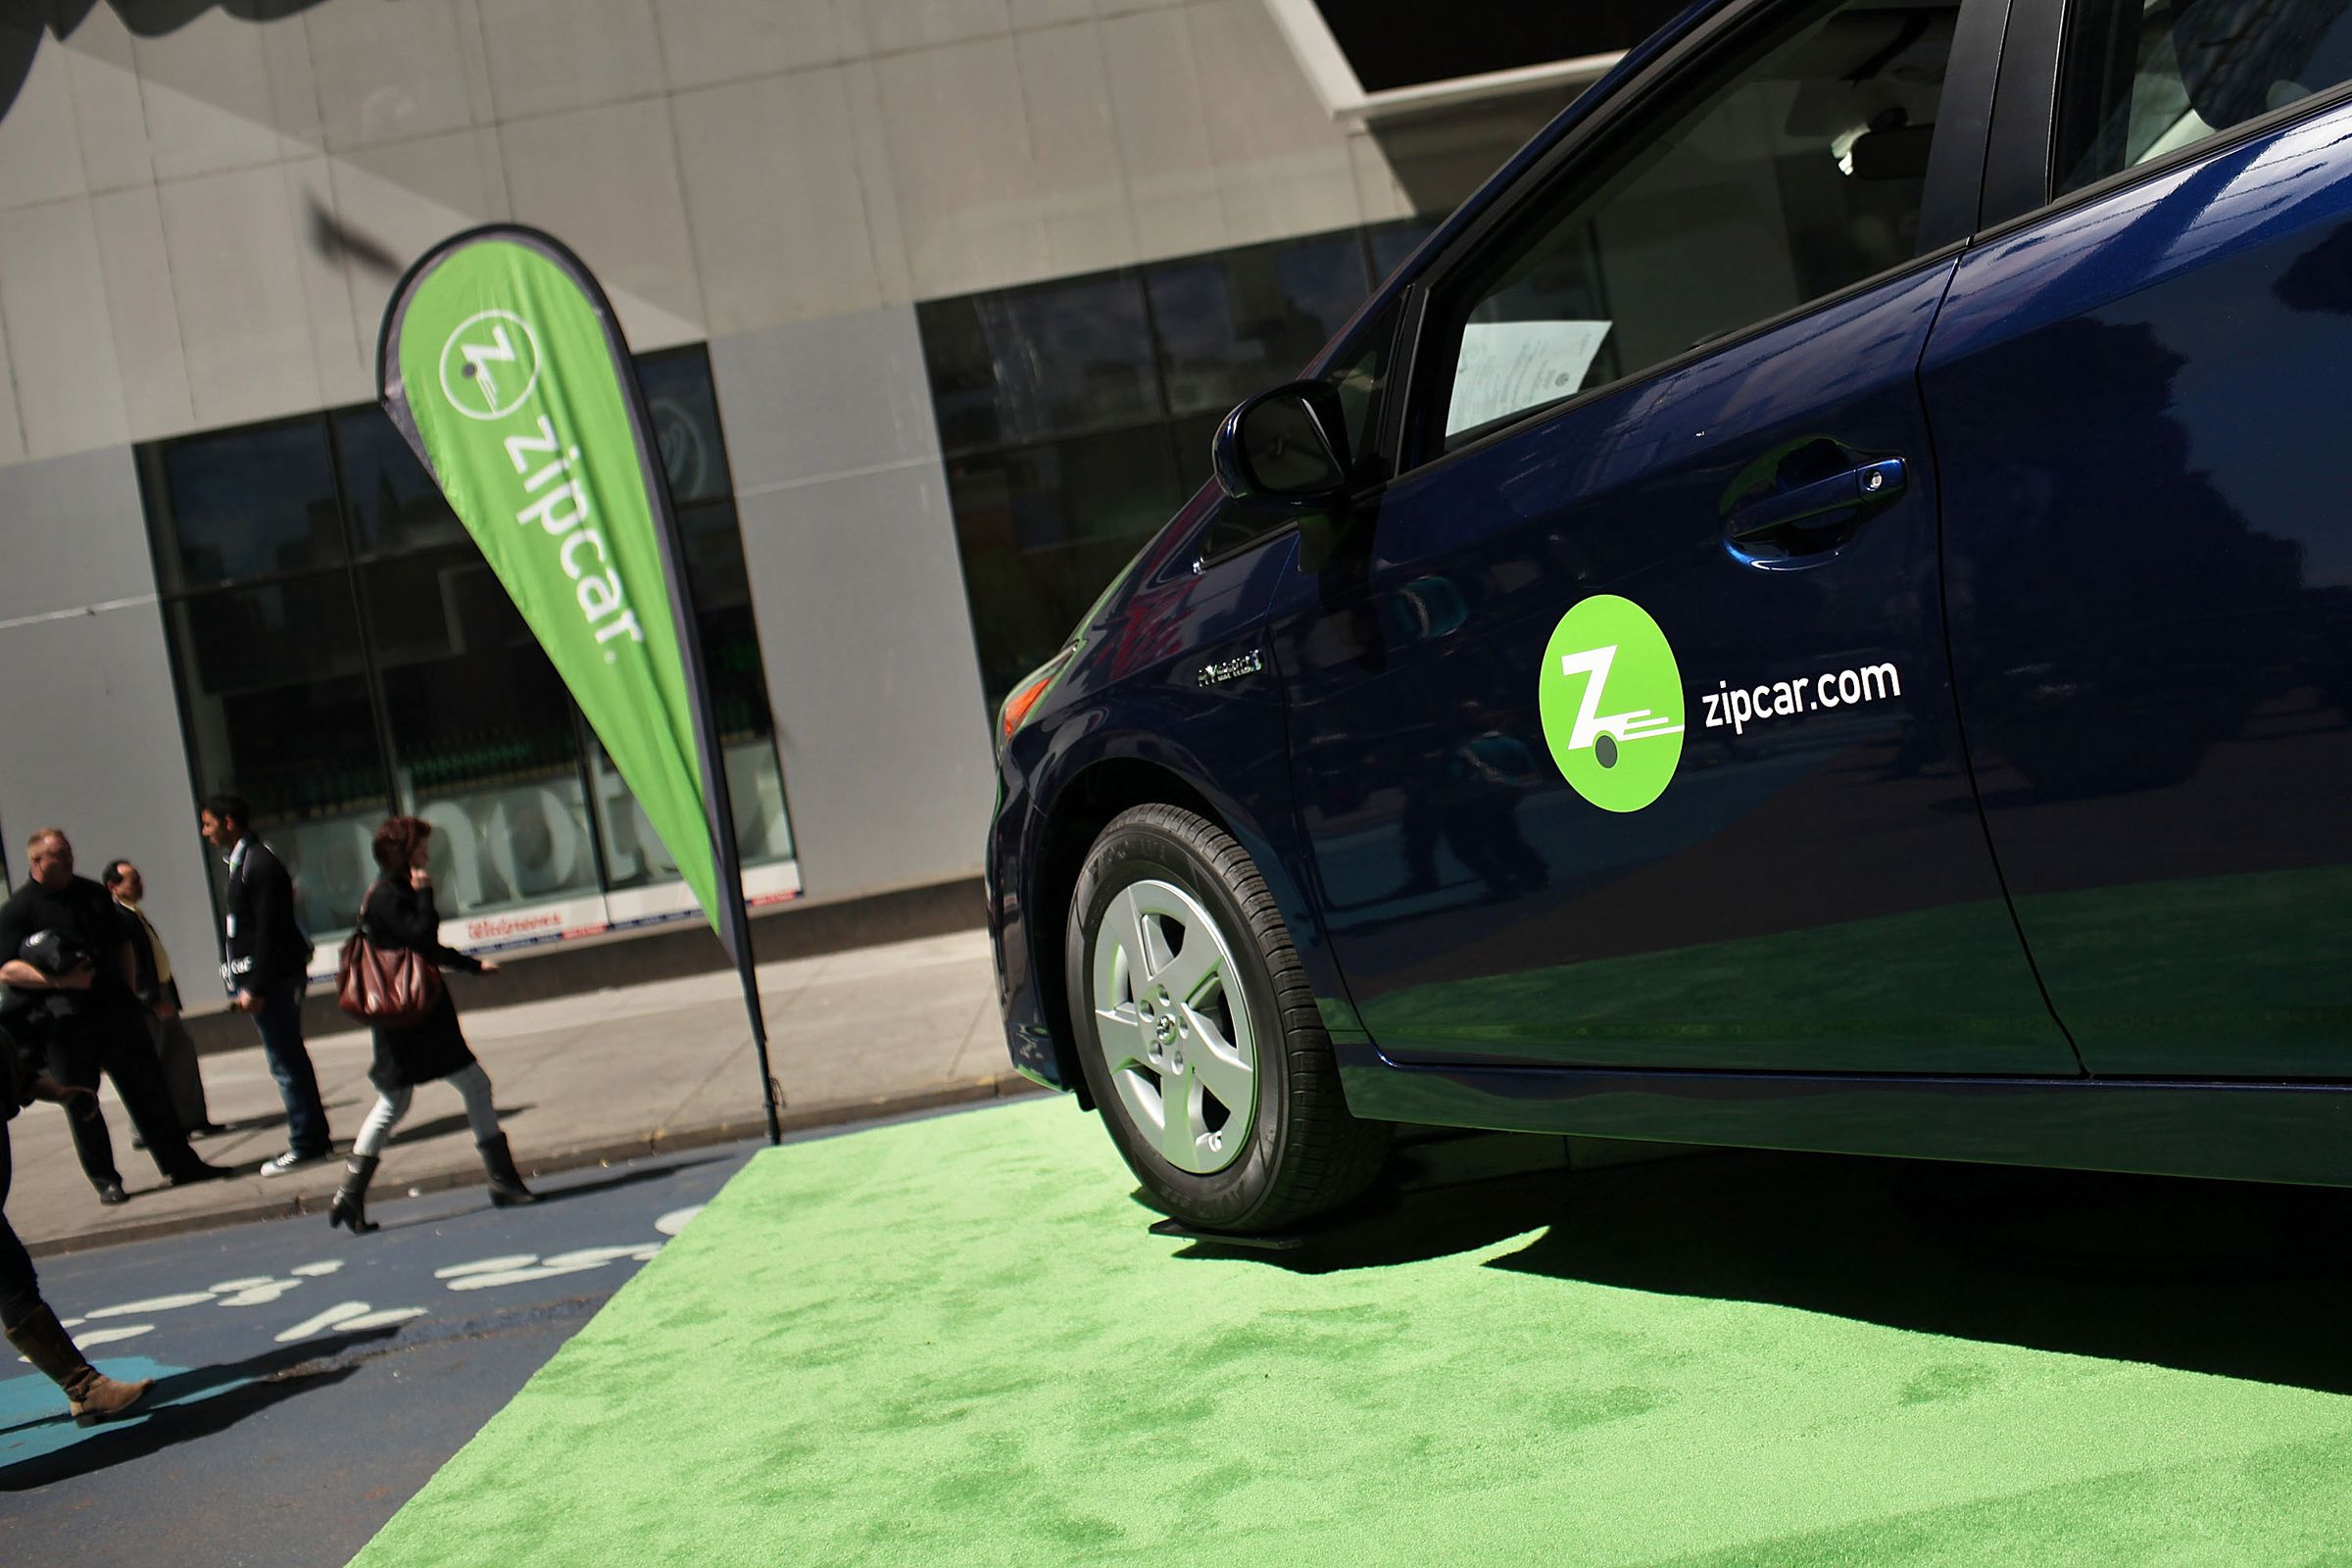 Zipcar To Start Trading On NASDAQ After Initial Public Offering